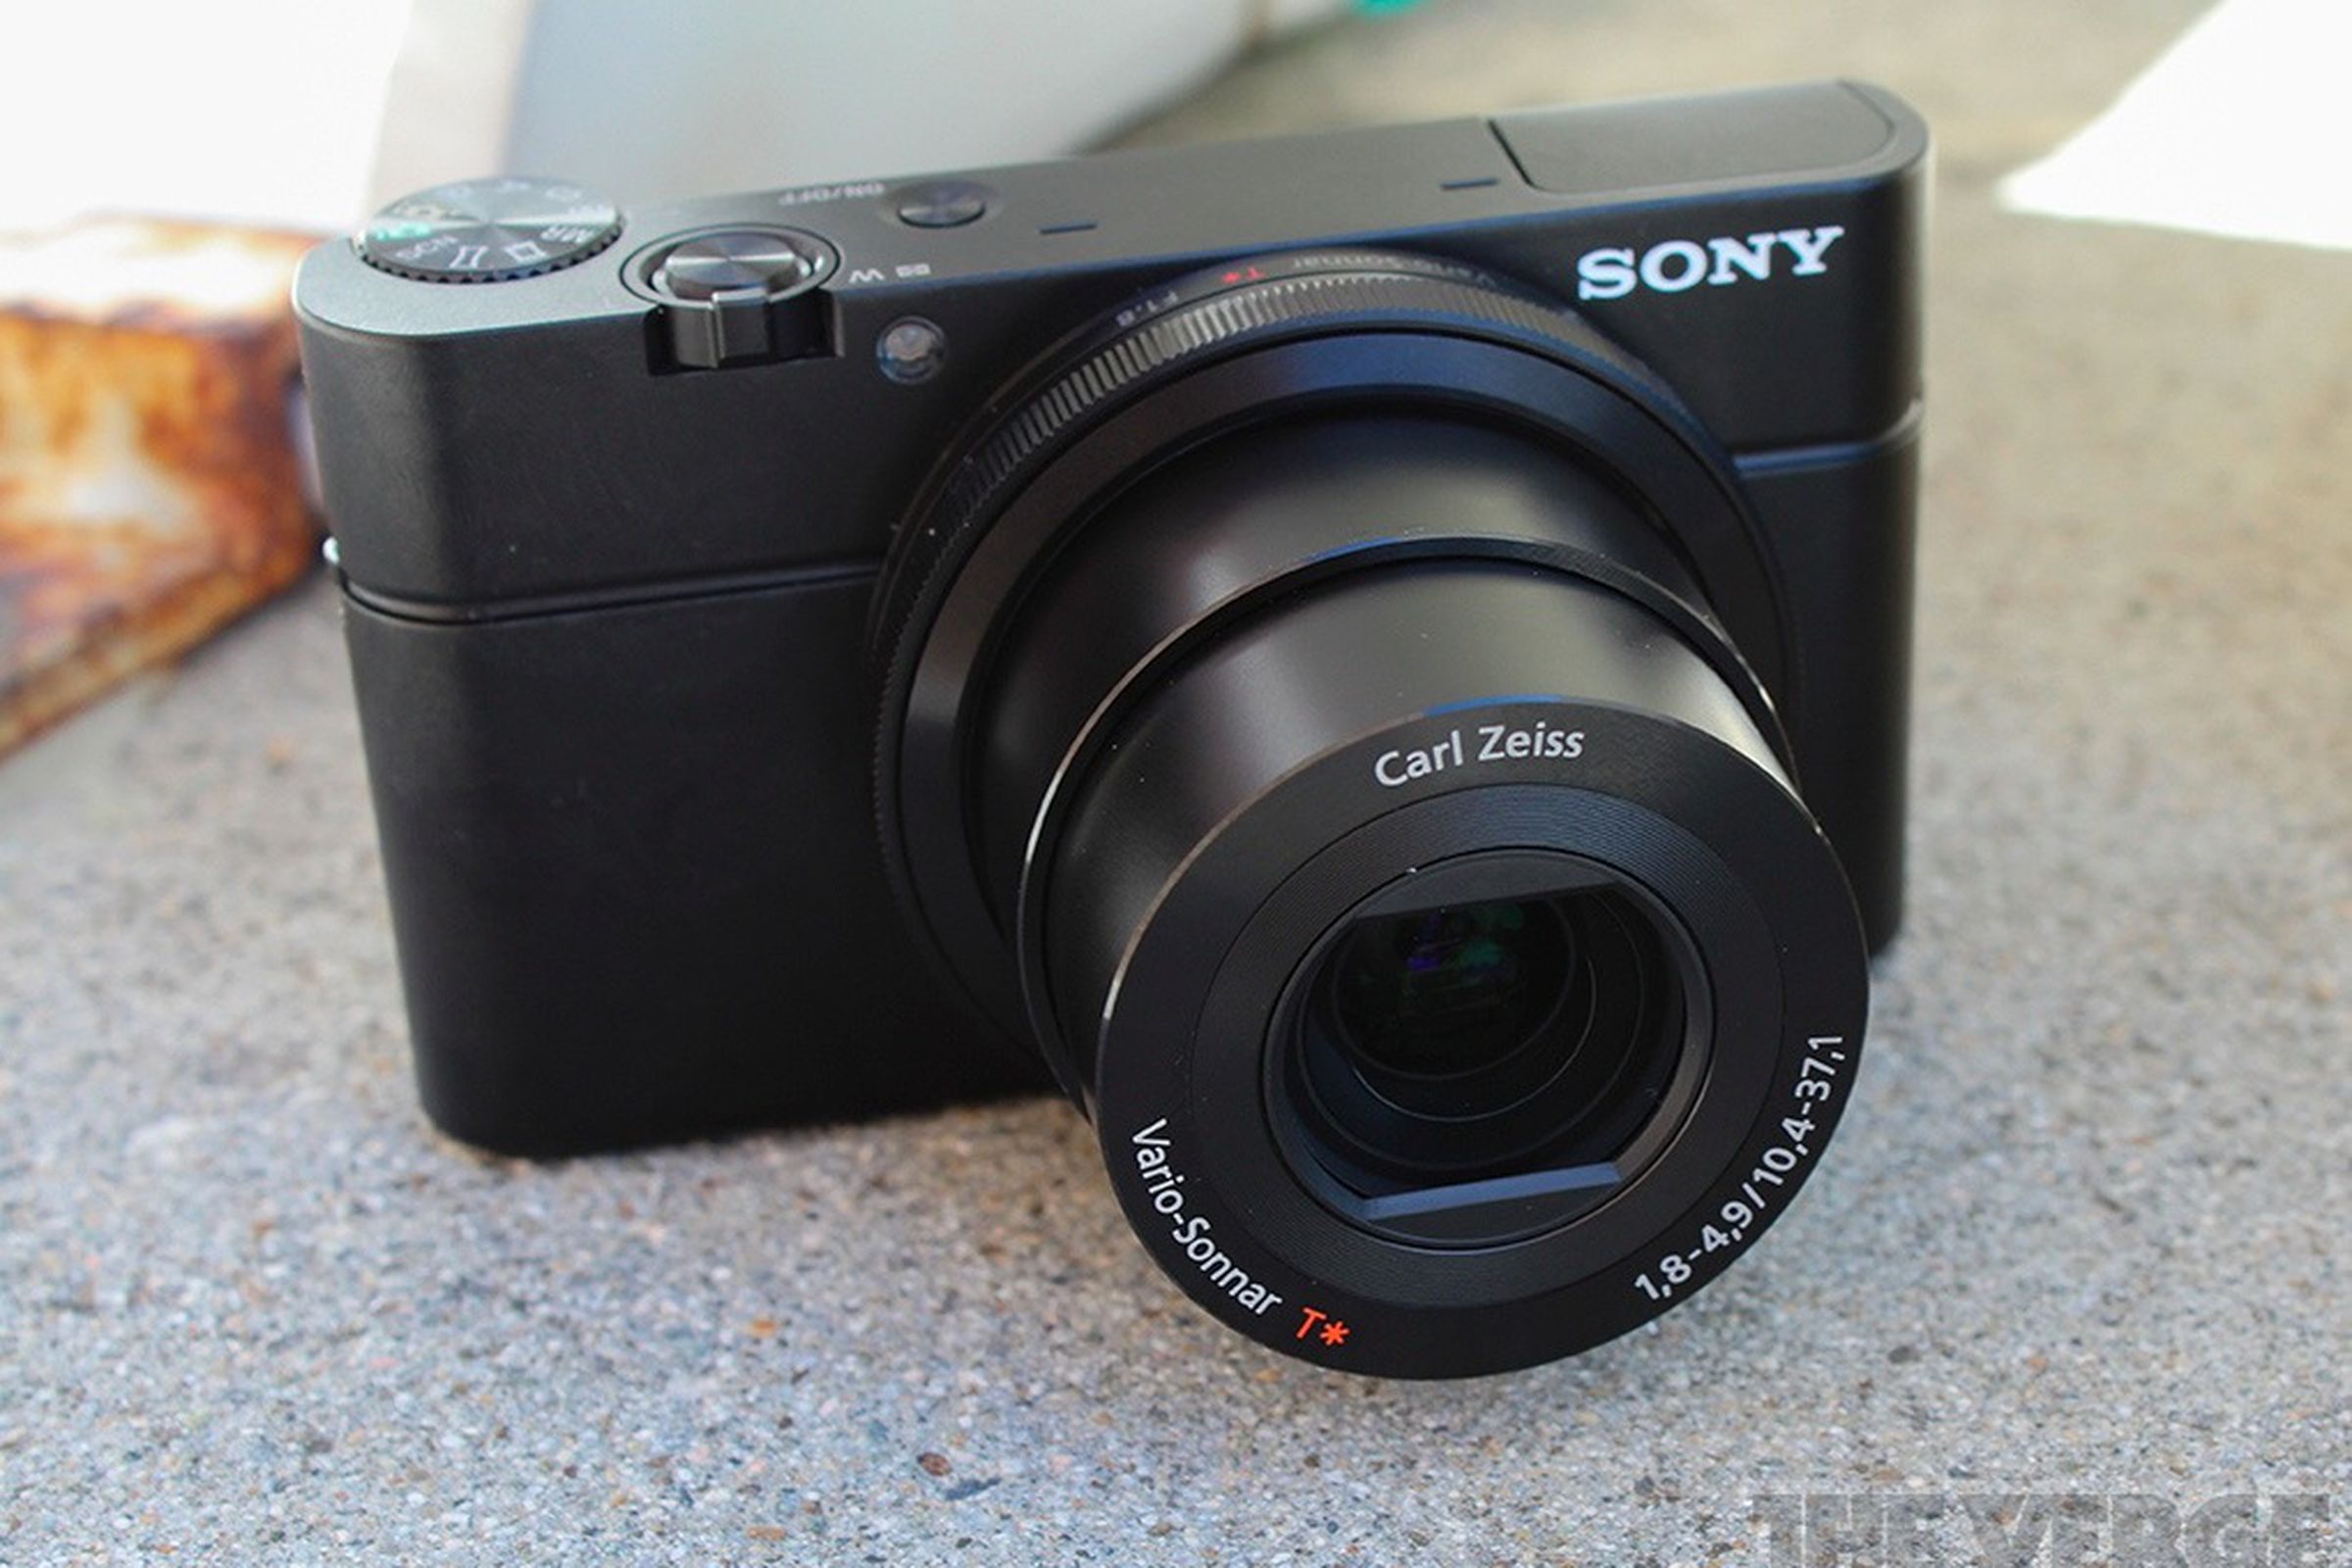 Gallery Photo: Sony Cybershot DSC-RX100 hands on pictures 